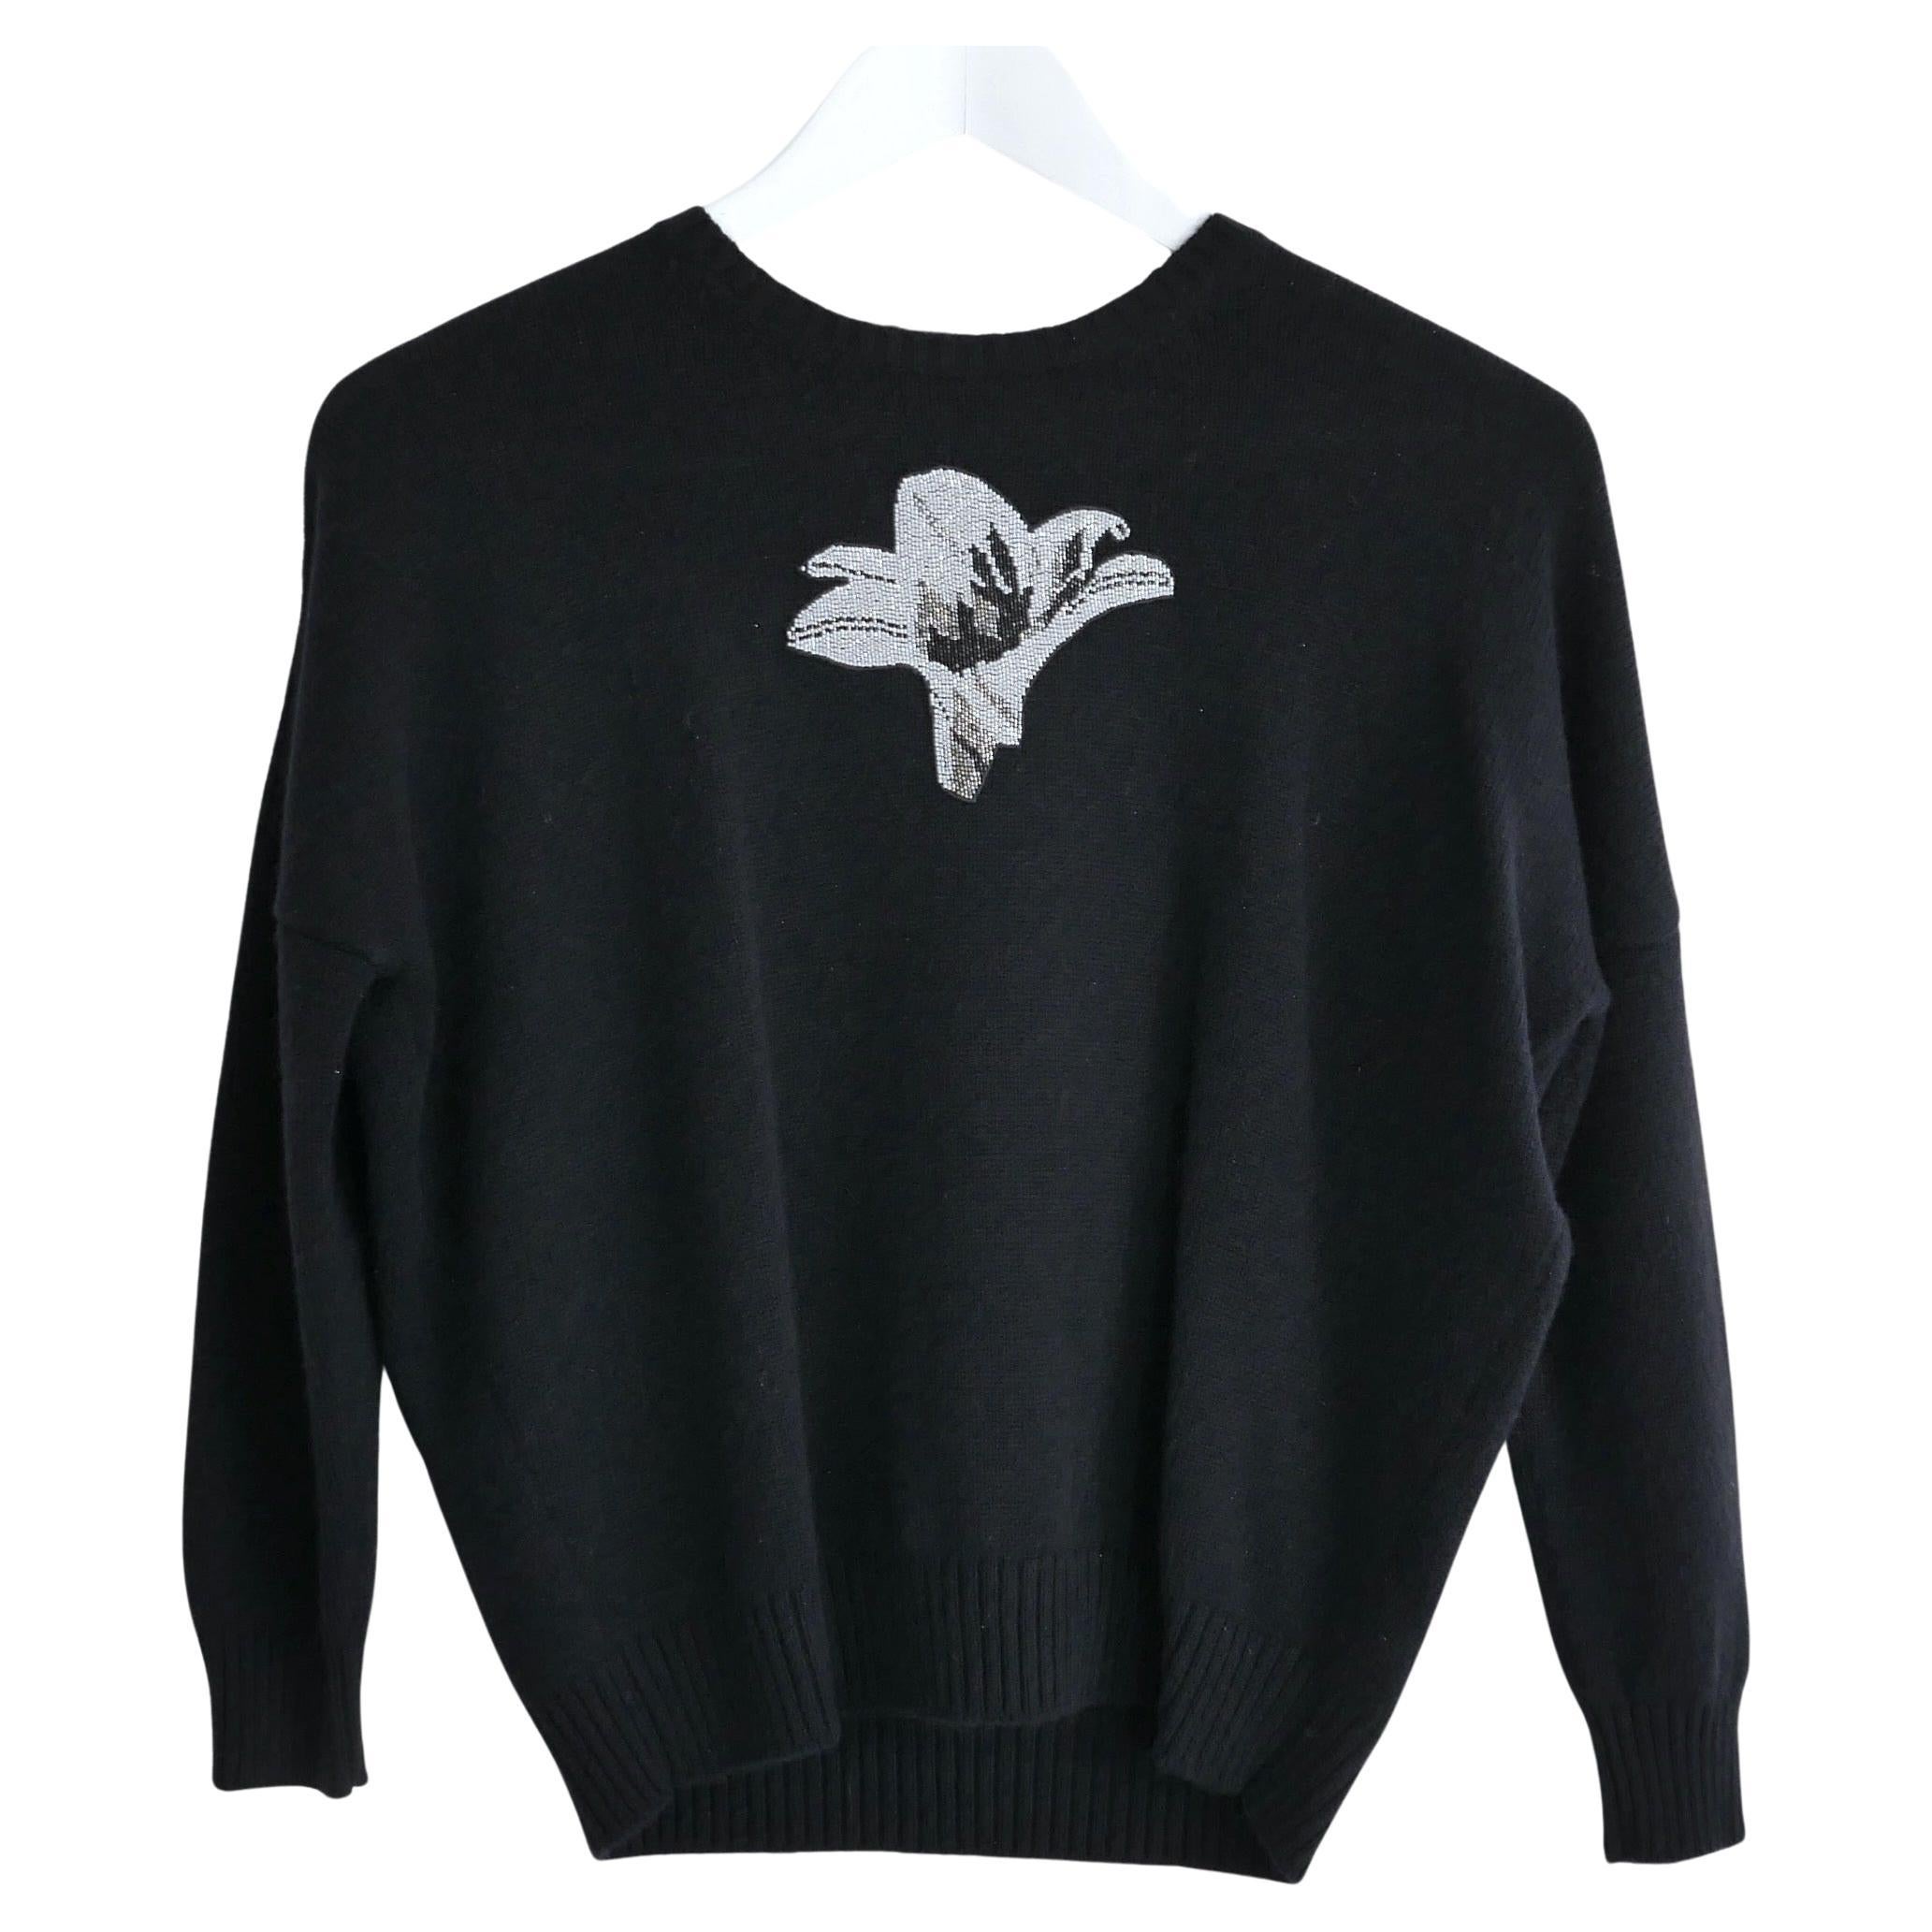 Dior x Raf Simons Pre-Fall '14 Lily Beaded Cashmere Pullover im Angebot